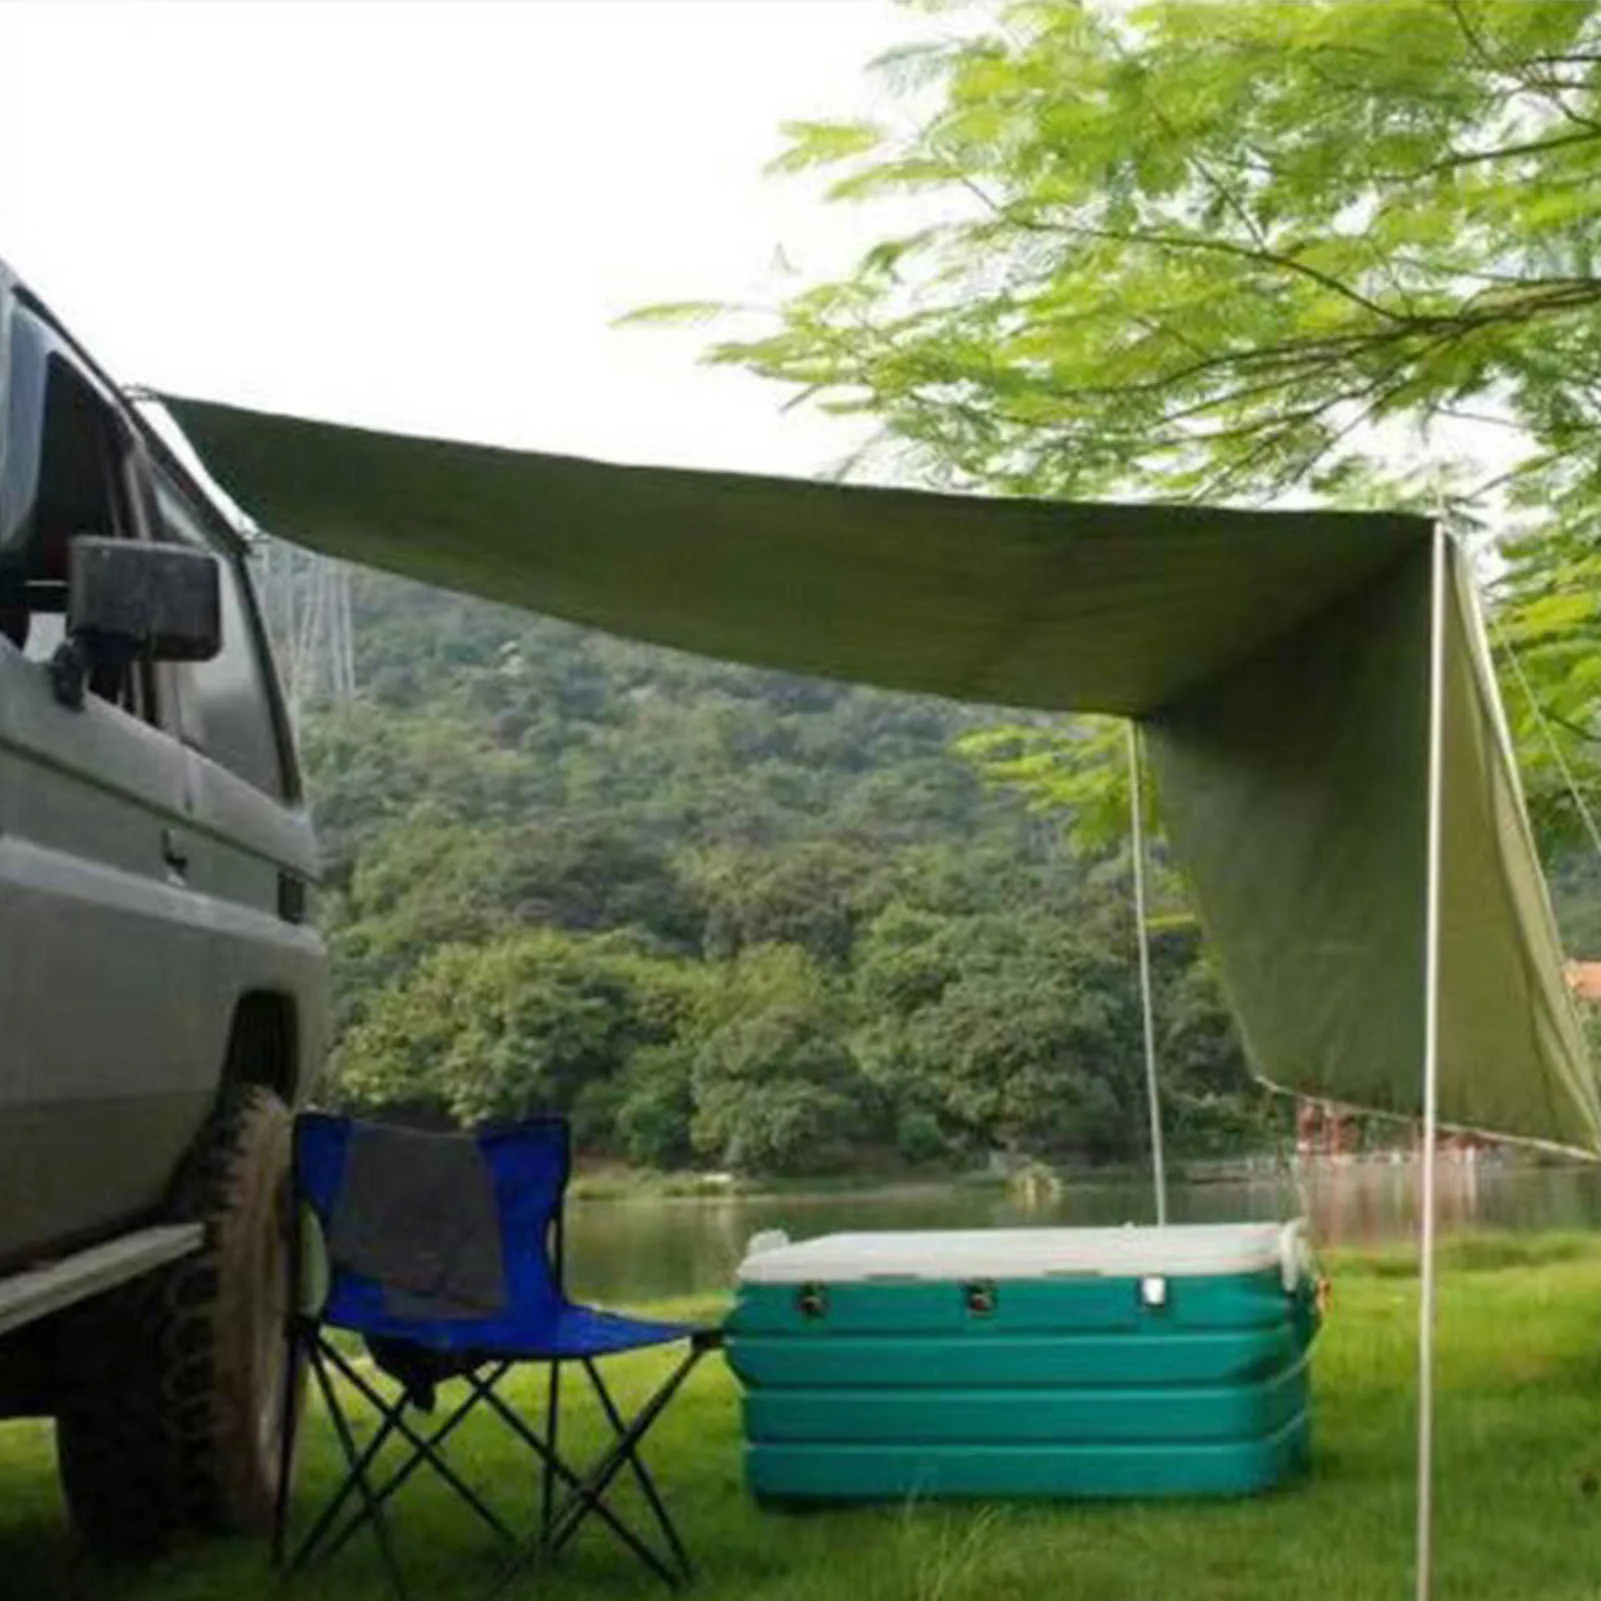 Portable Car Side Awning Rooftop Tent Sun Shelter Shade 2.8*1.8m SUV Camping Canopy Outdoor Travel Hiking Tents Accessories Kit Y0706